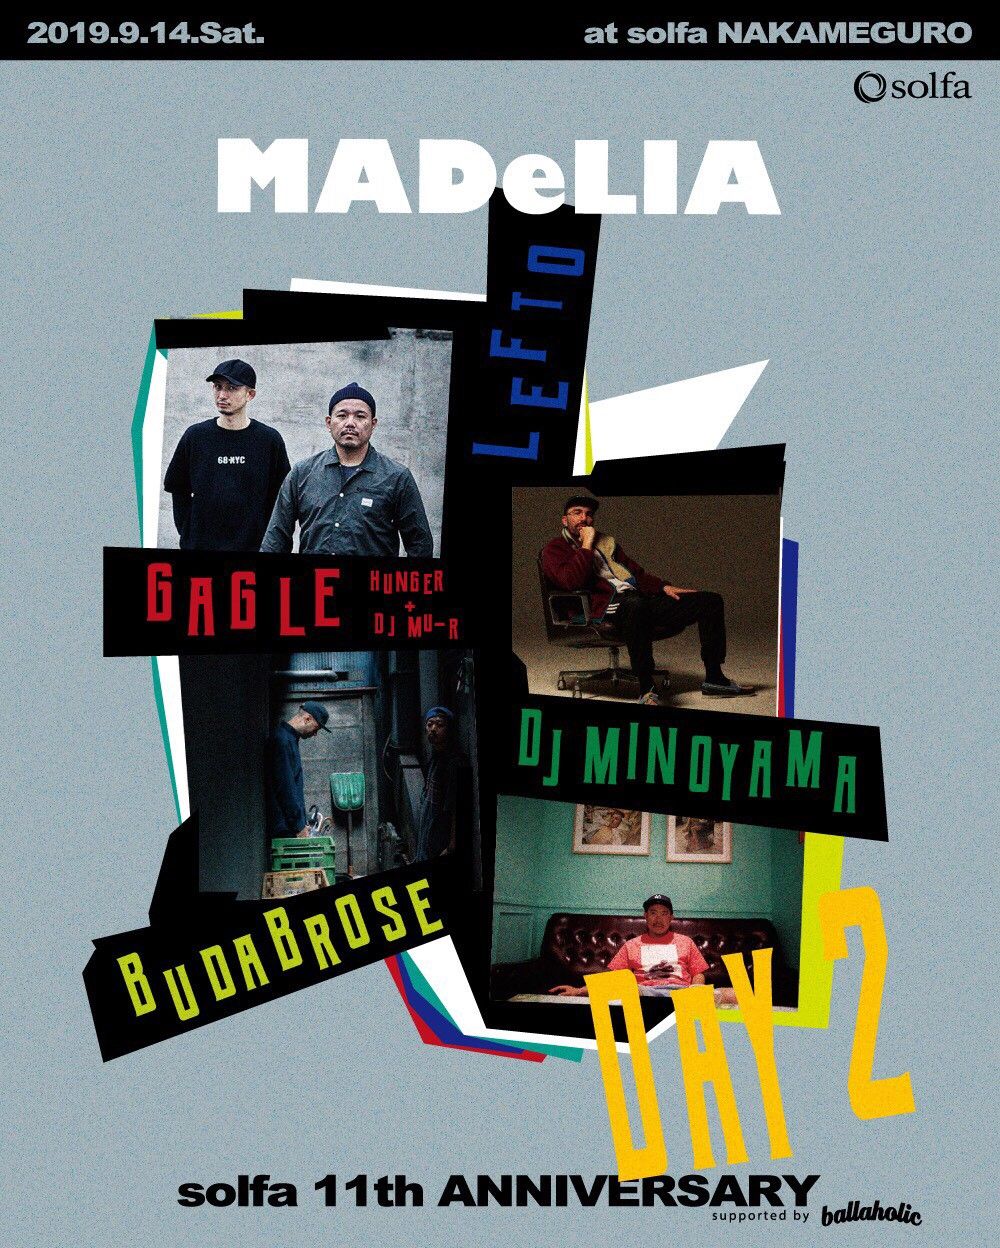 solfa 11th Anniversary -supported by ballaholic- DAY 2 “MADeLIA”